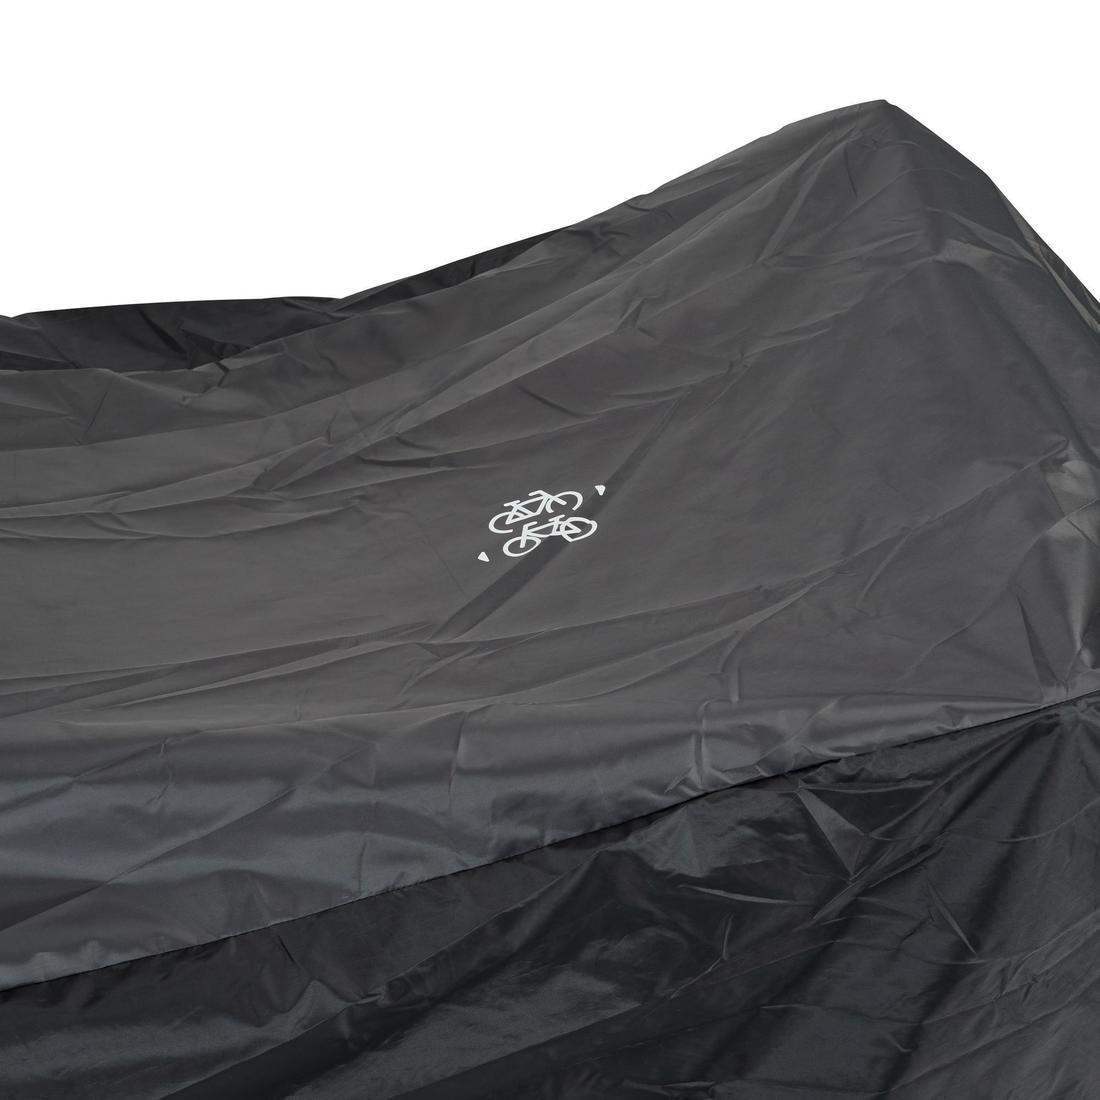 DECATHLON - Protective Cover For 2 Bikes, Black